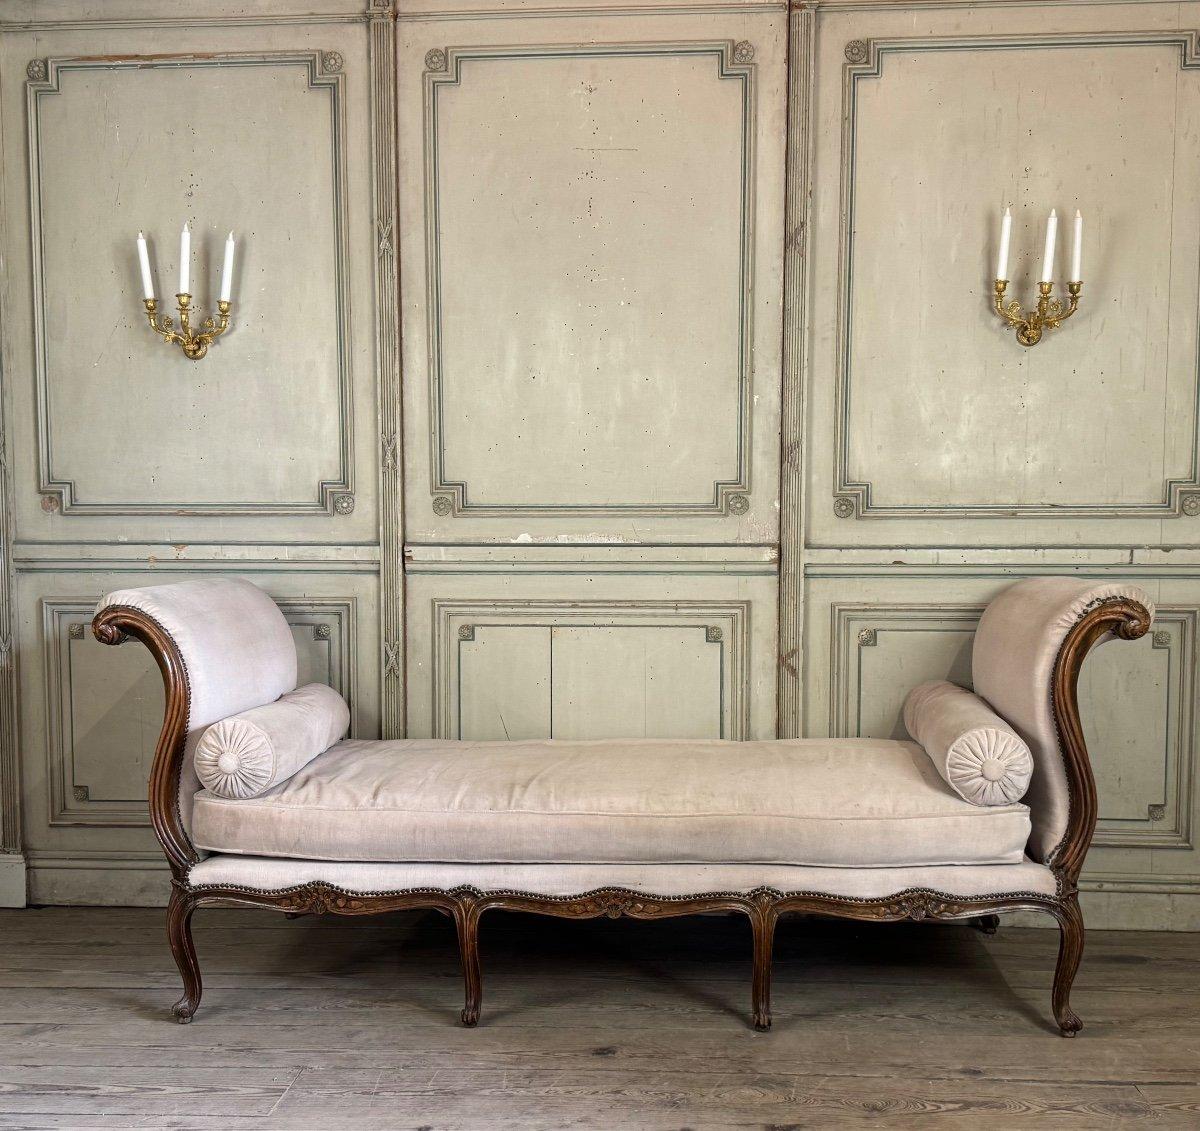 Louis XV daybed in beech carved on all 4 sides, velvet in good condition but it is preferable to replace it. the furniture deserves a high quality fabric